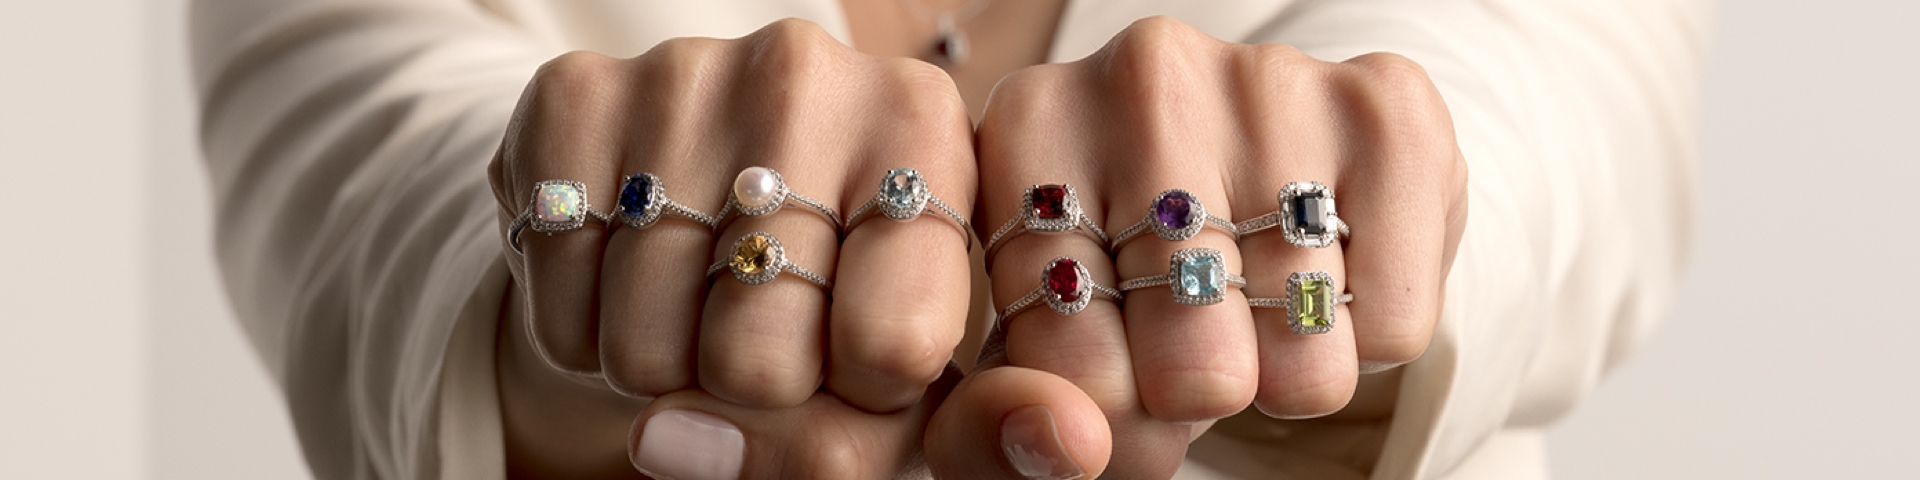 Woman wearing multiple gemstone rings on all of her fingers